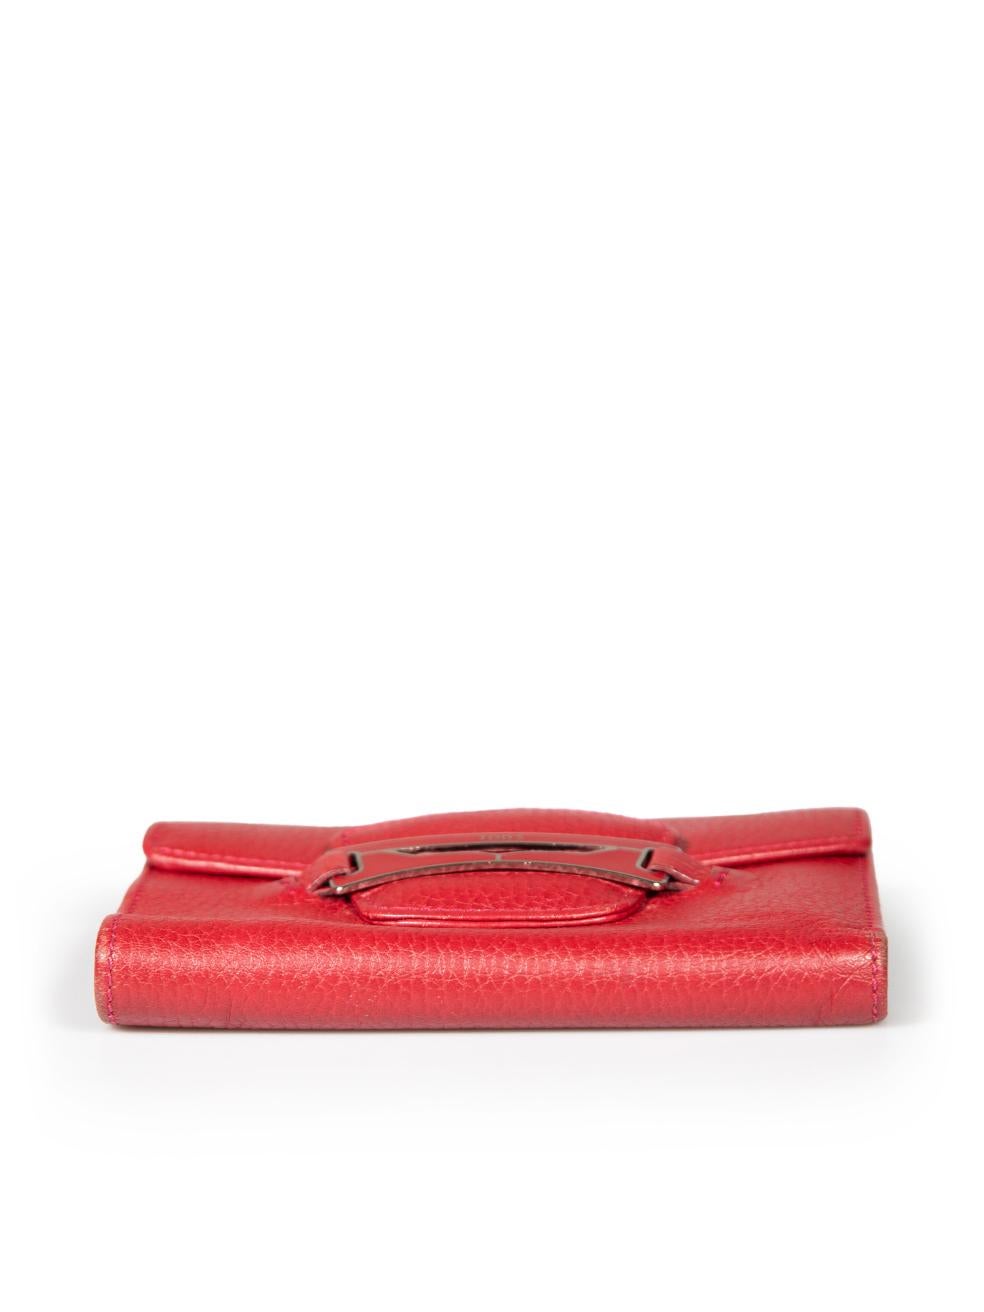 Women's Tod's Red Leather Wallet For Sale